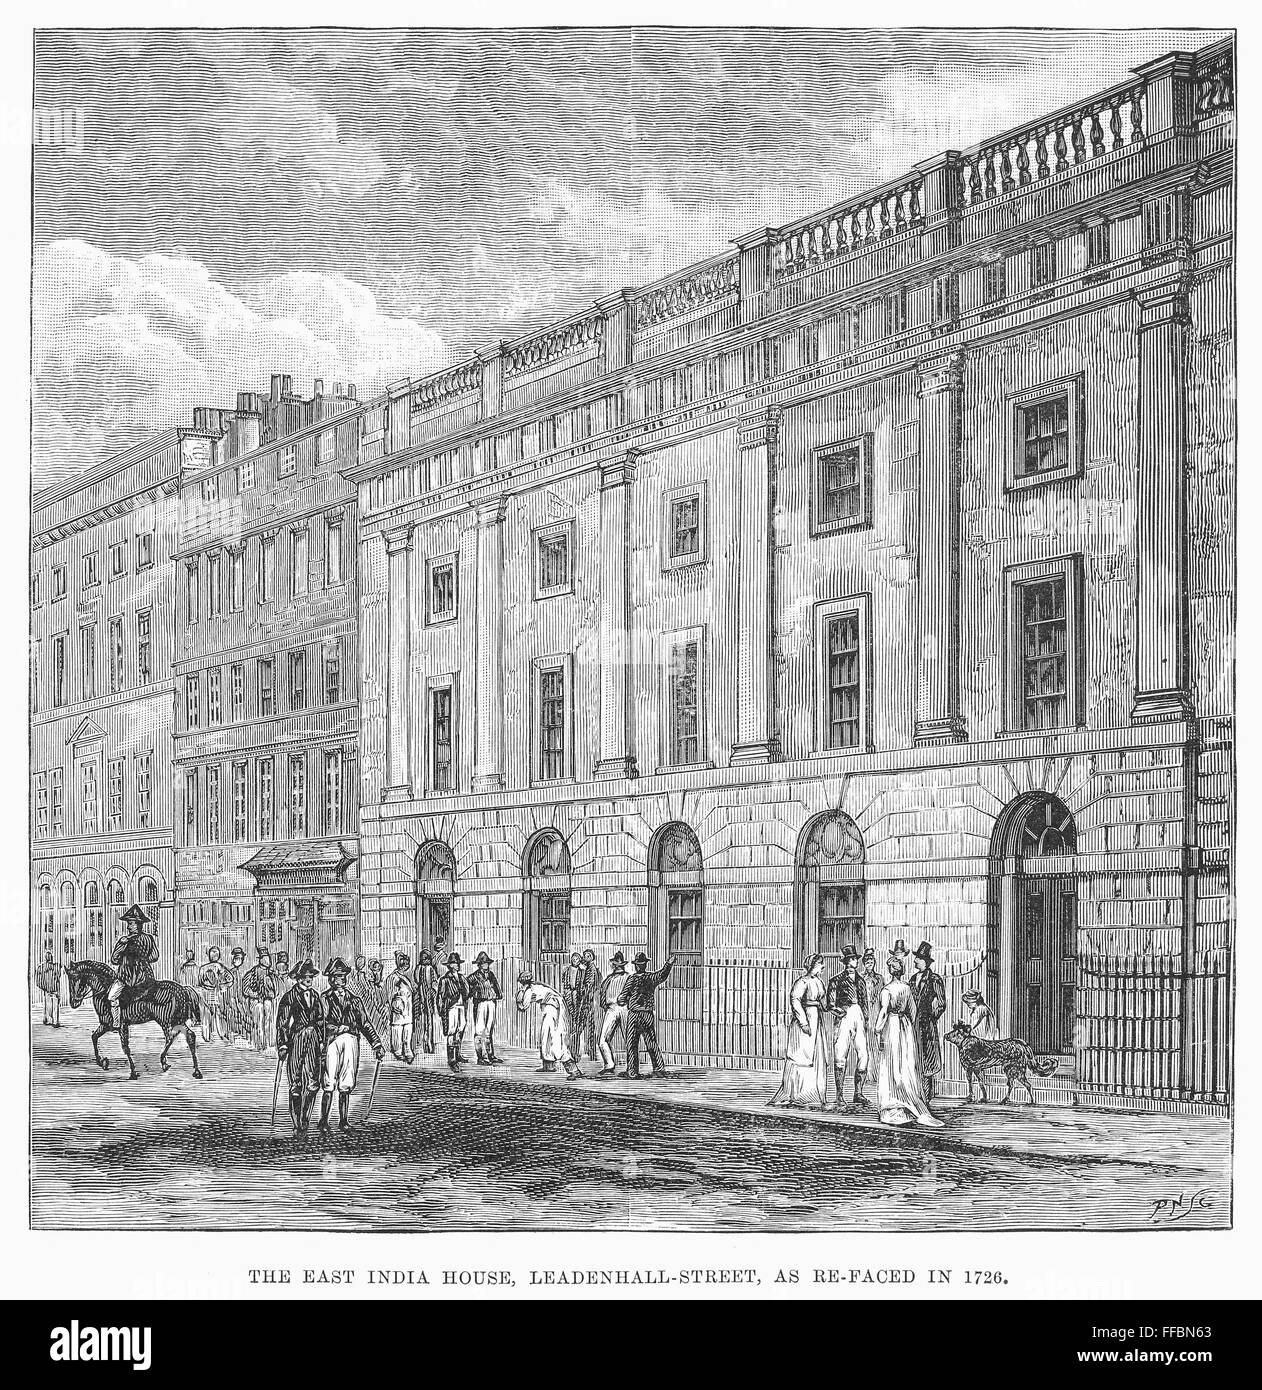 BRITISH EAST INDIA COMPANY. /nThe East India House in Leadenhall Street, London, England, as it appeared after being refaced in 1726. Wood engraving, English, 1890. Stock Photo